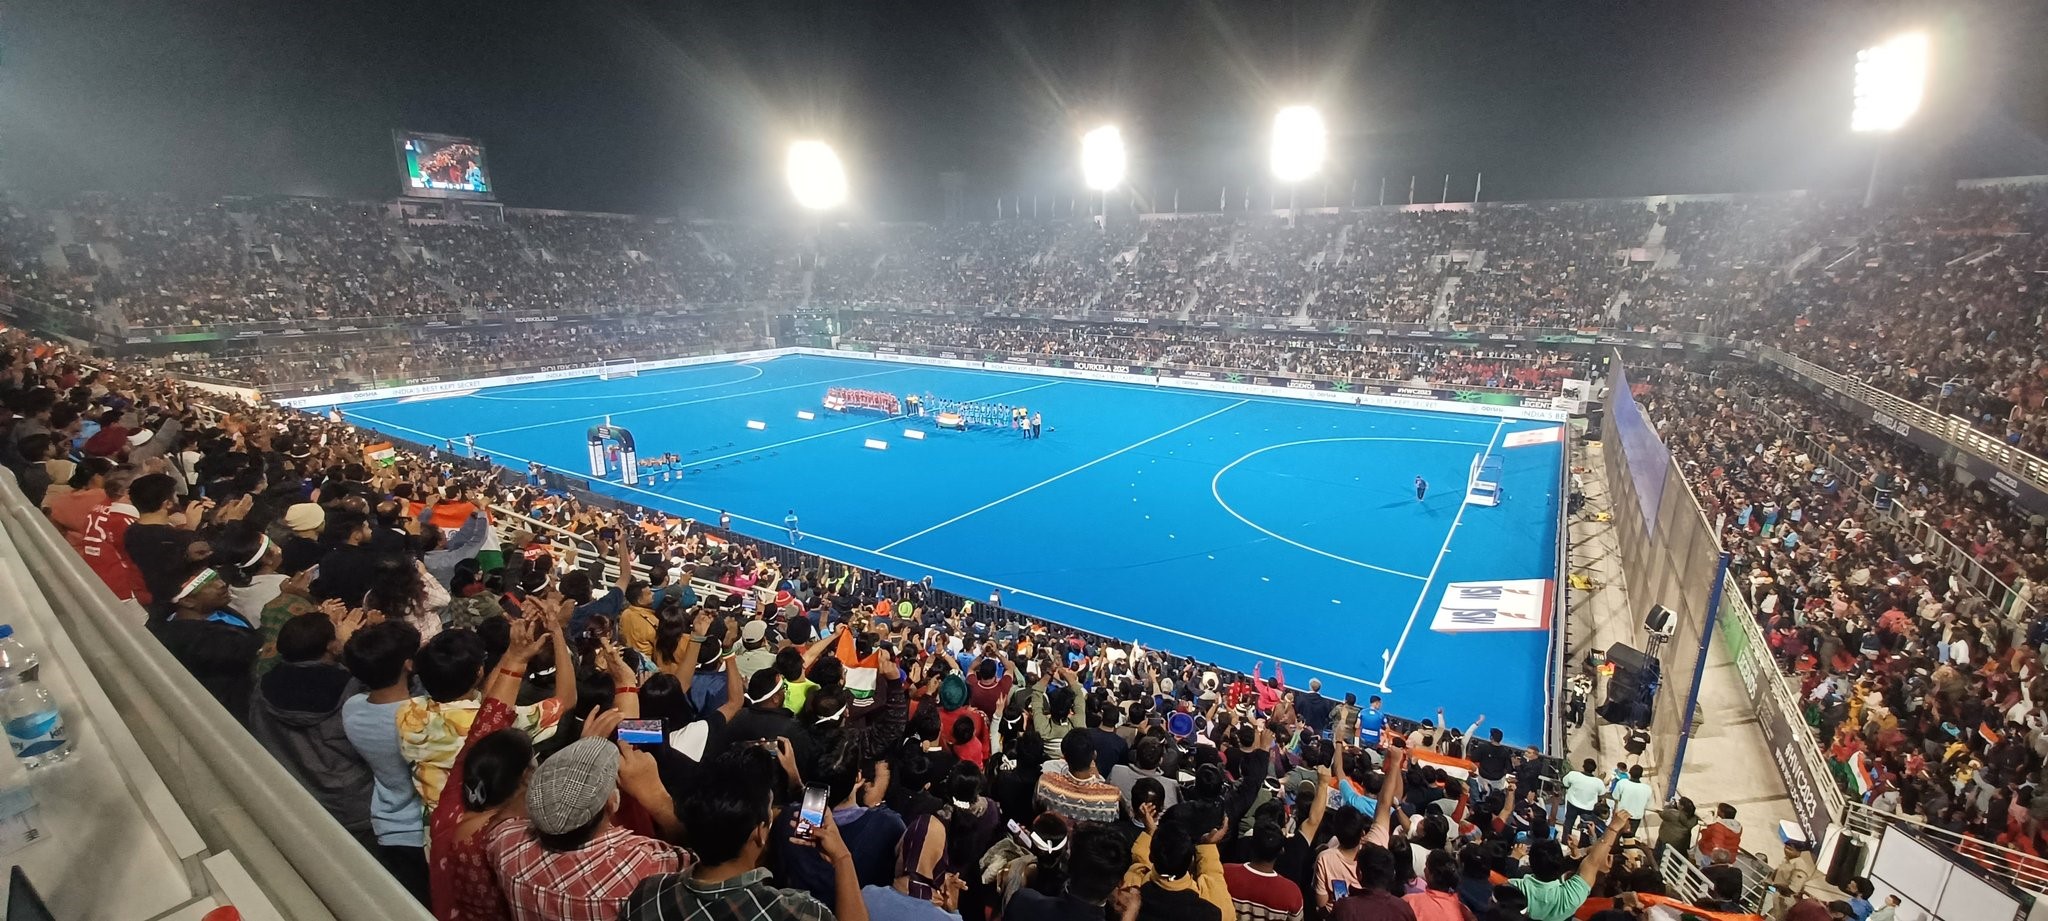 Image shows a view of an indoor hockey pitch from a full crowd viewing area.